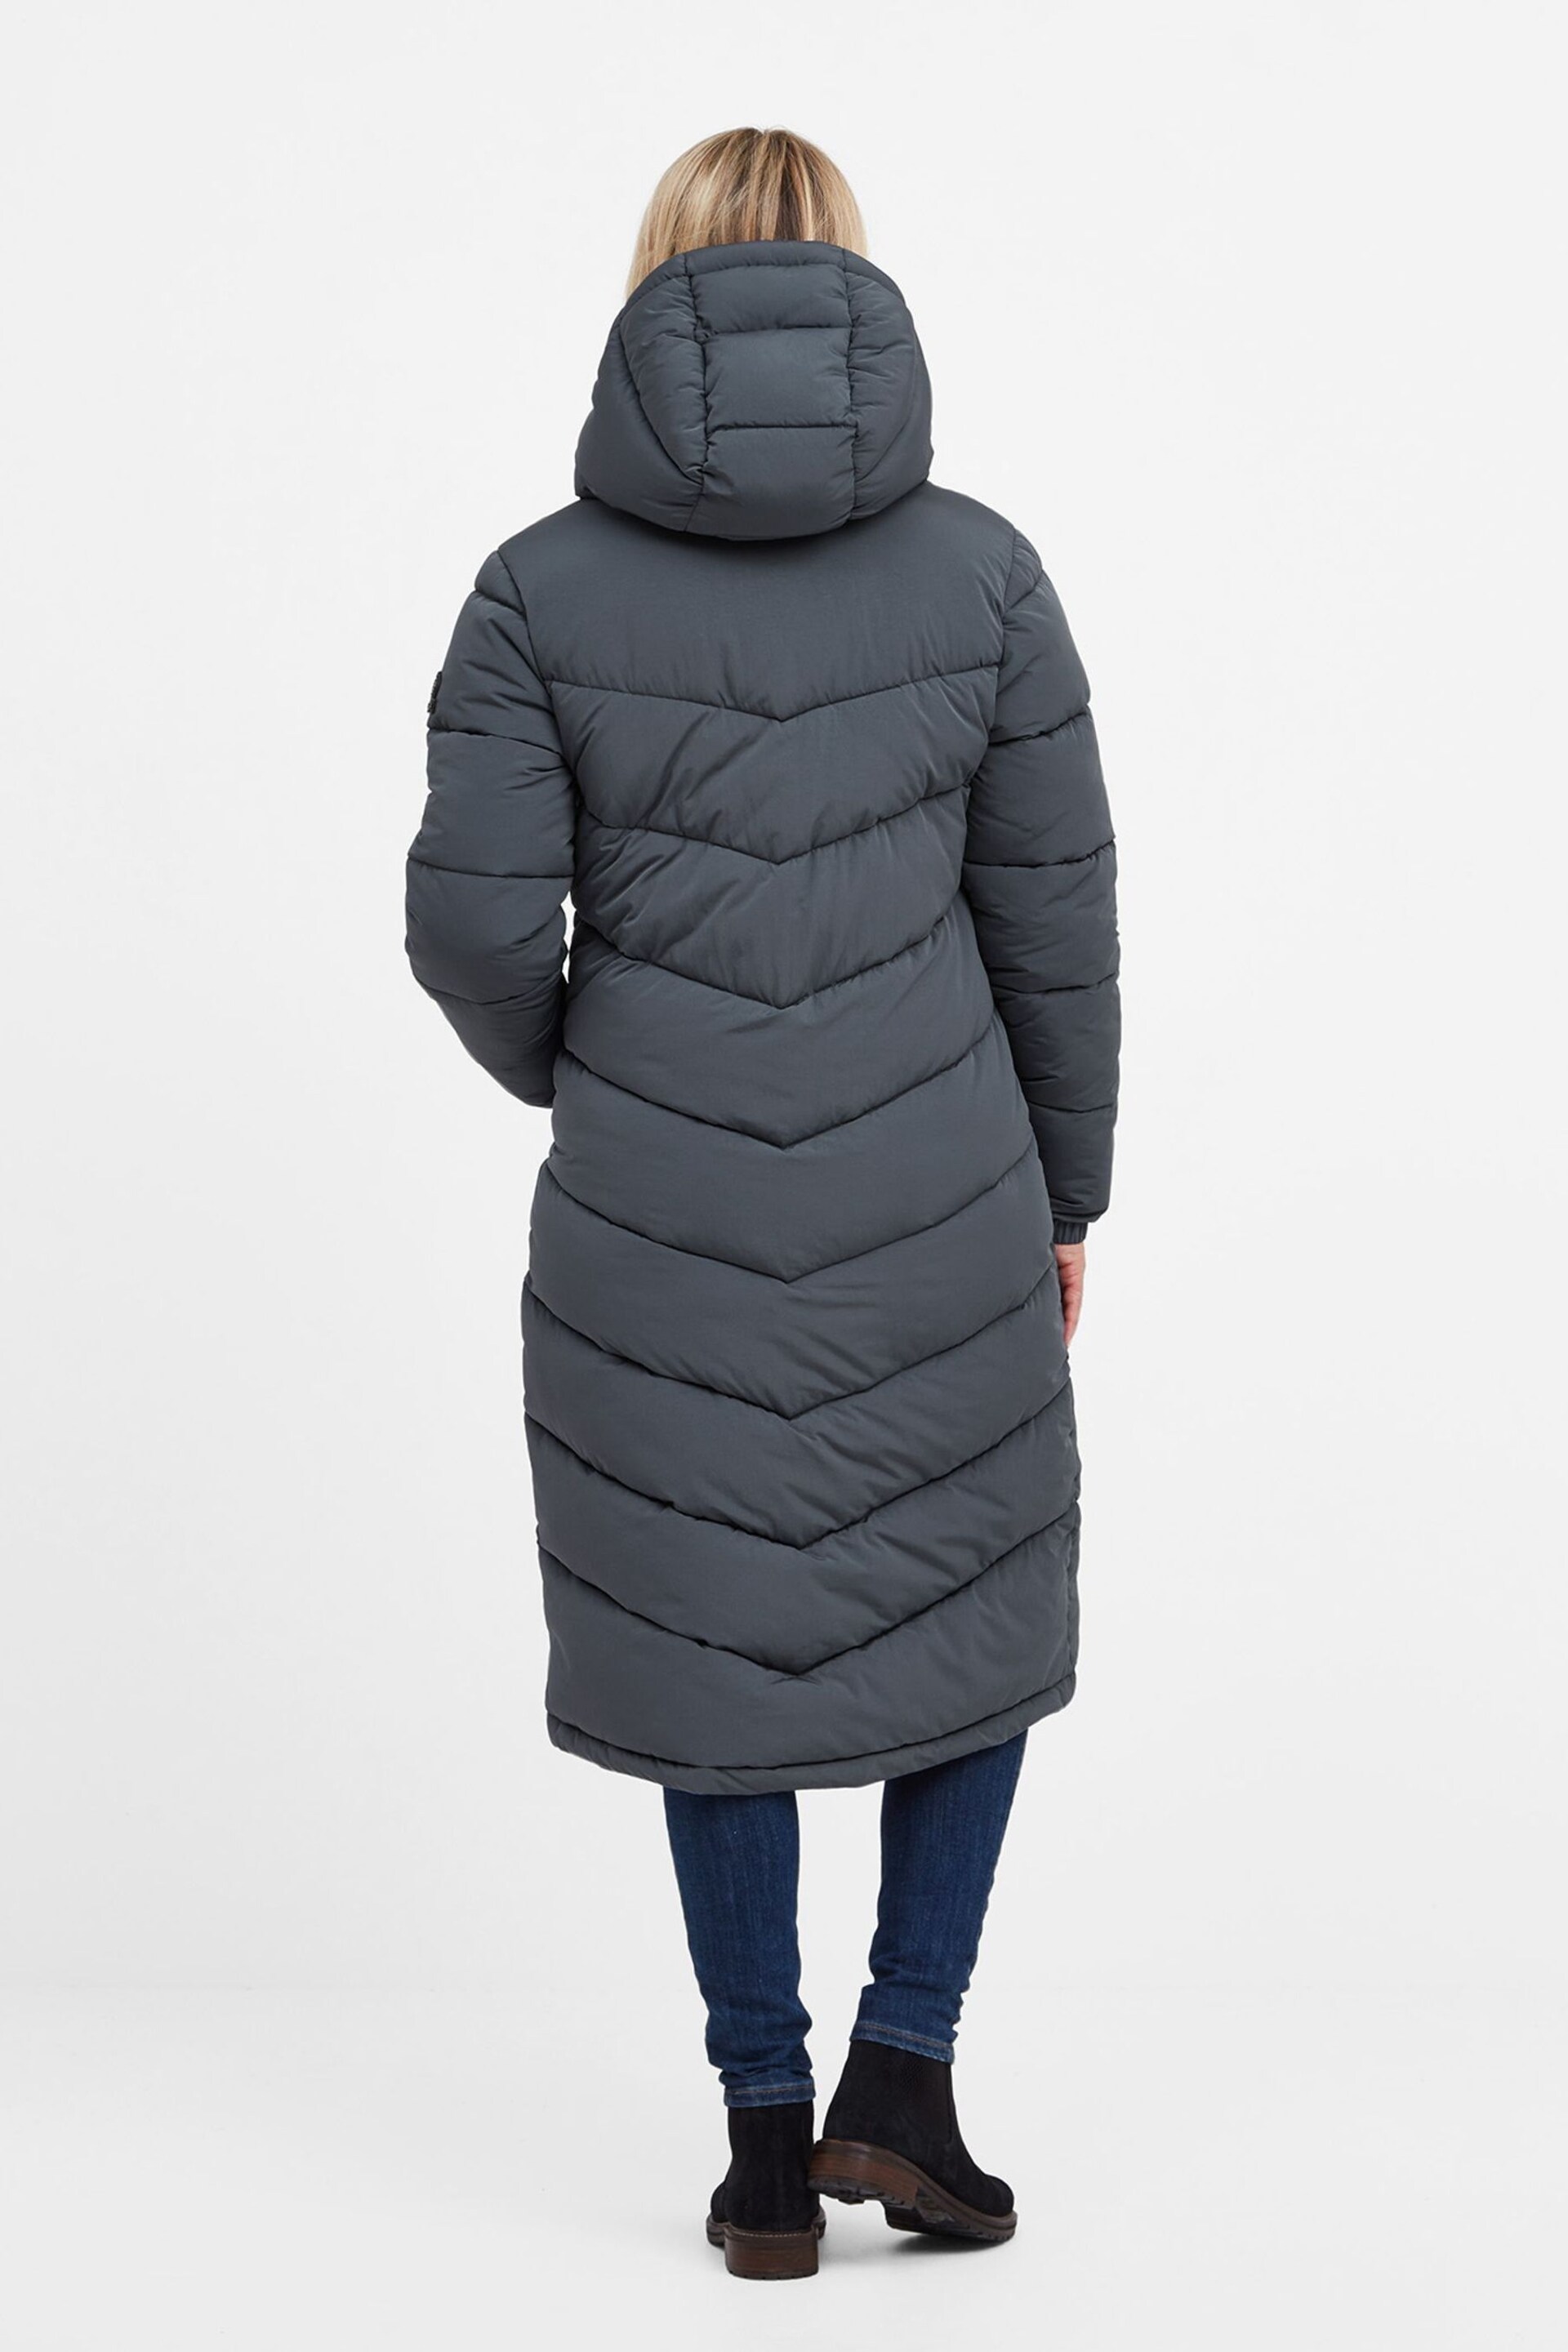 Tog 24 Blue Raleigh Thermal Padded Long Coat - Image 2 of 7